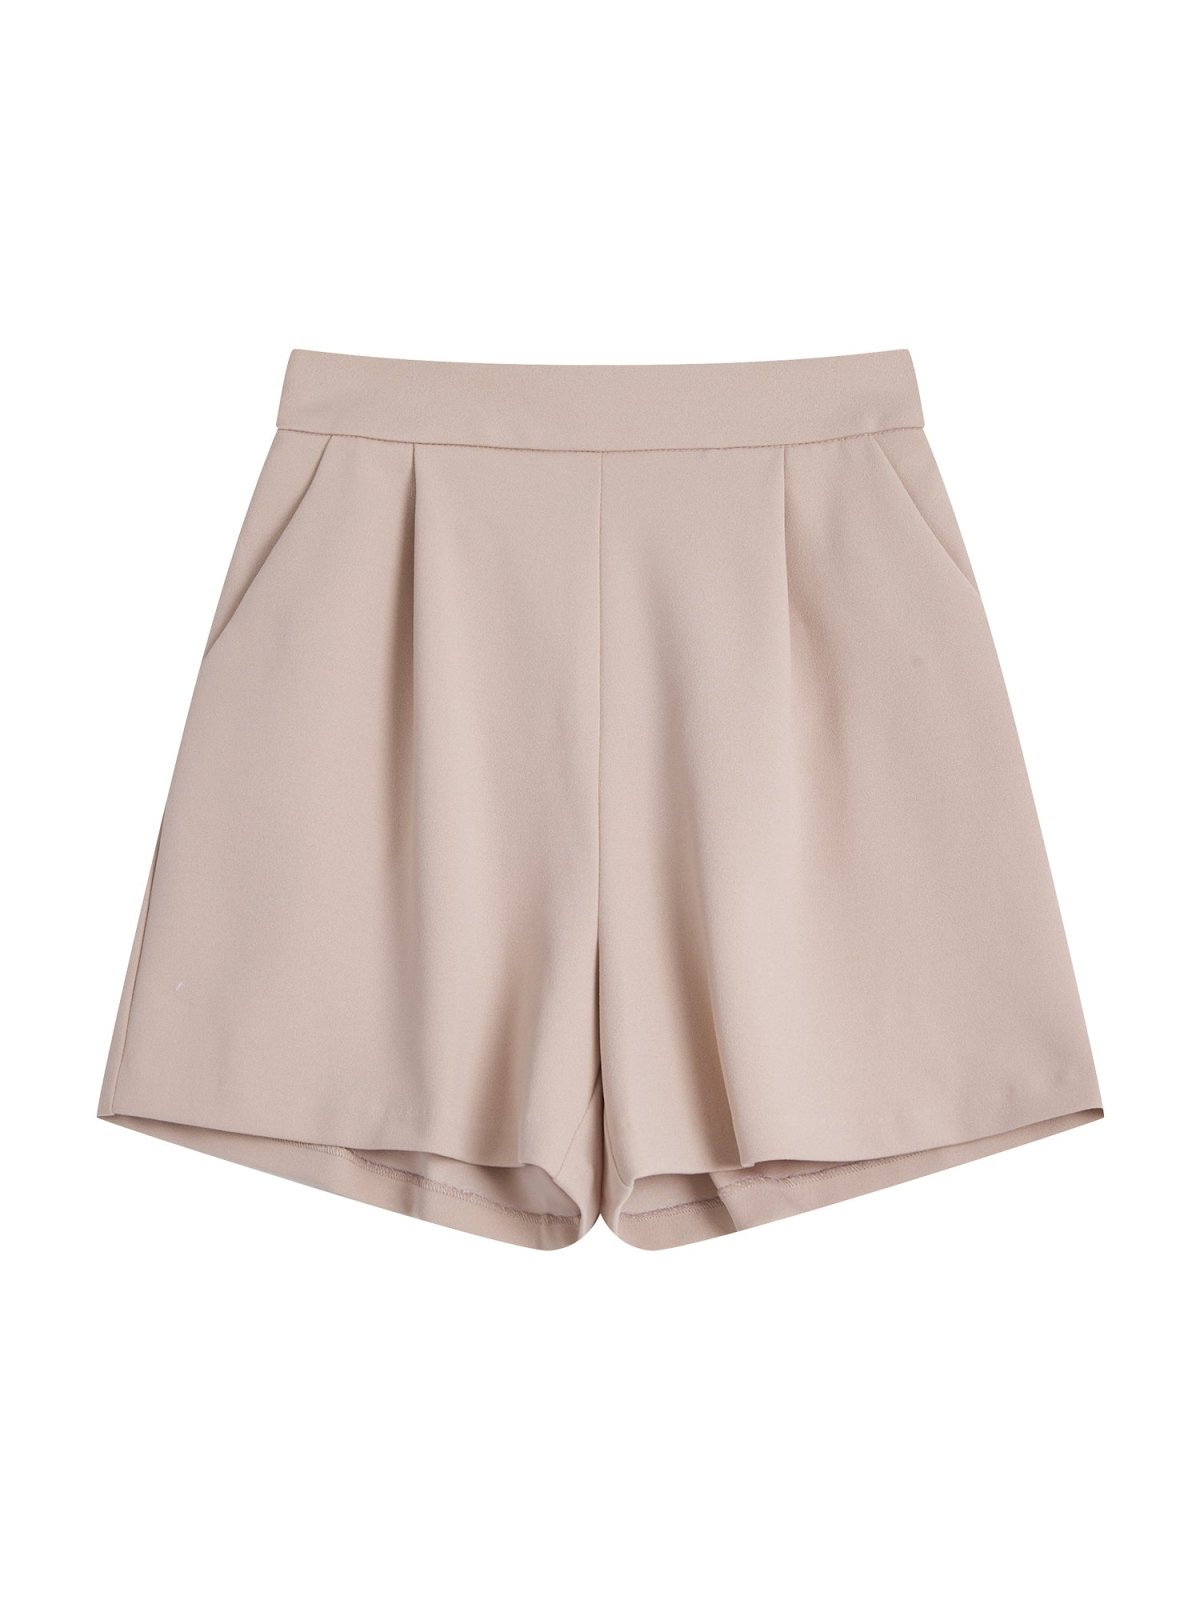 Pleated A-line Shorts ALMOND - DAG-DD8509-21NudeS - Beige - S - D'ZAGE Designs